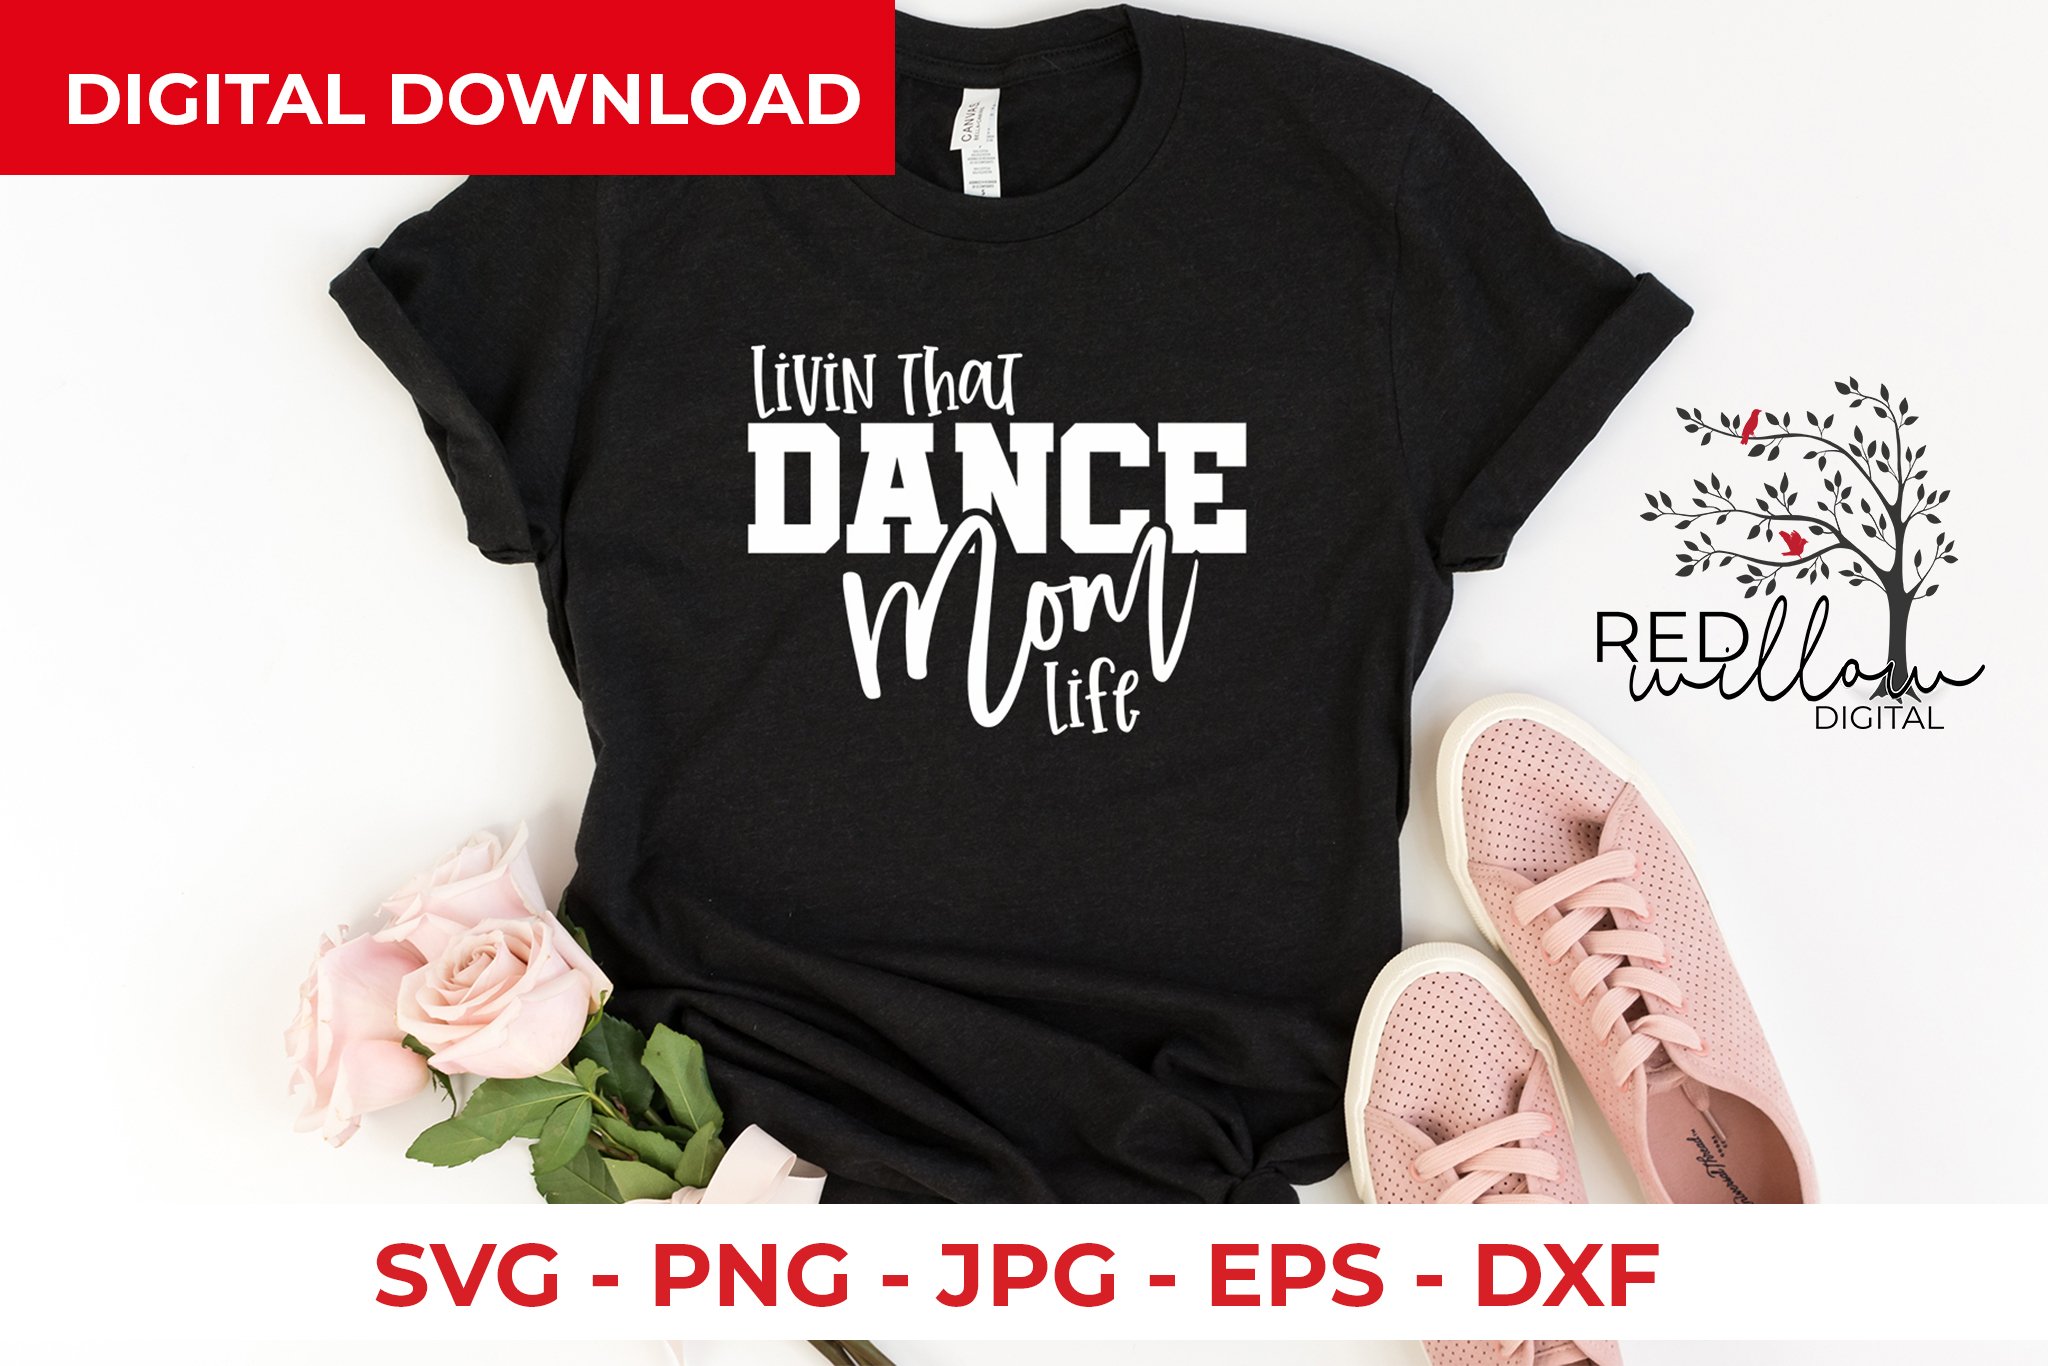 Black t-shirt with a print on the theme of dancing.